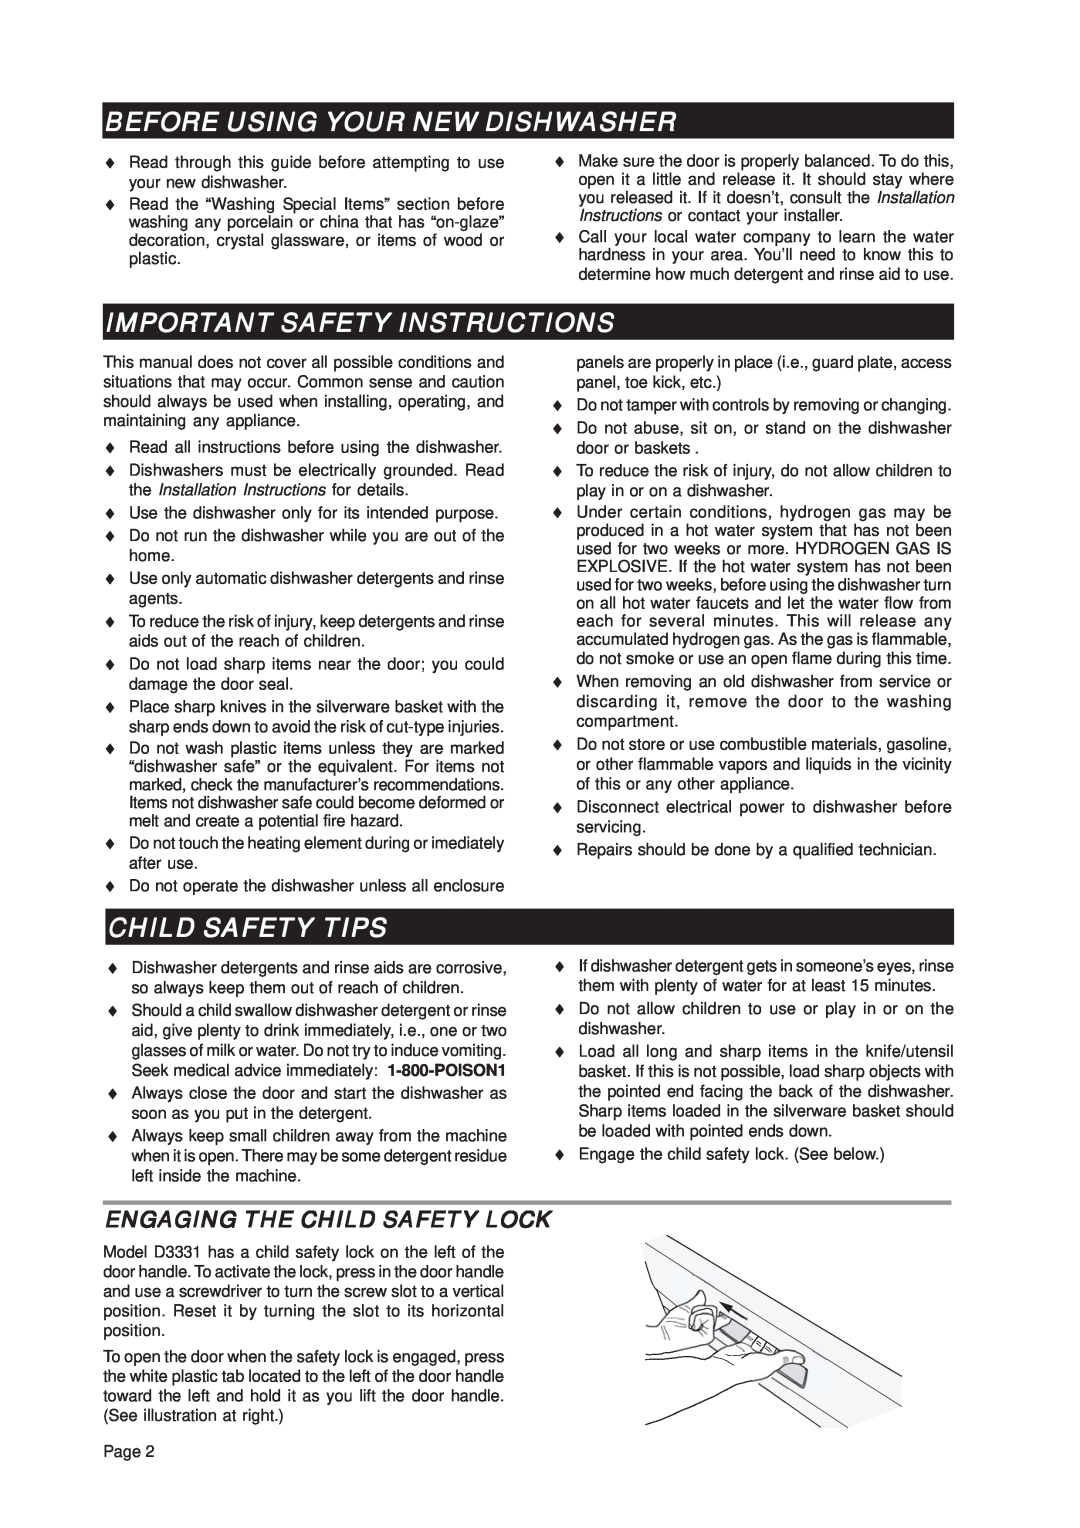 Asko D3331 important safety instructions Before Using Your New Dishwasher, Important Safety Instructions, Child Safety Tips 